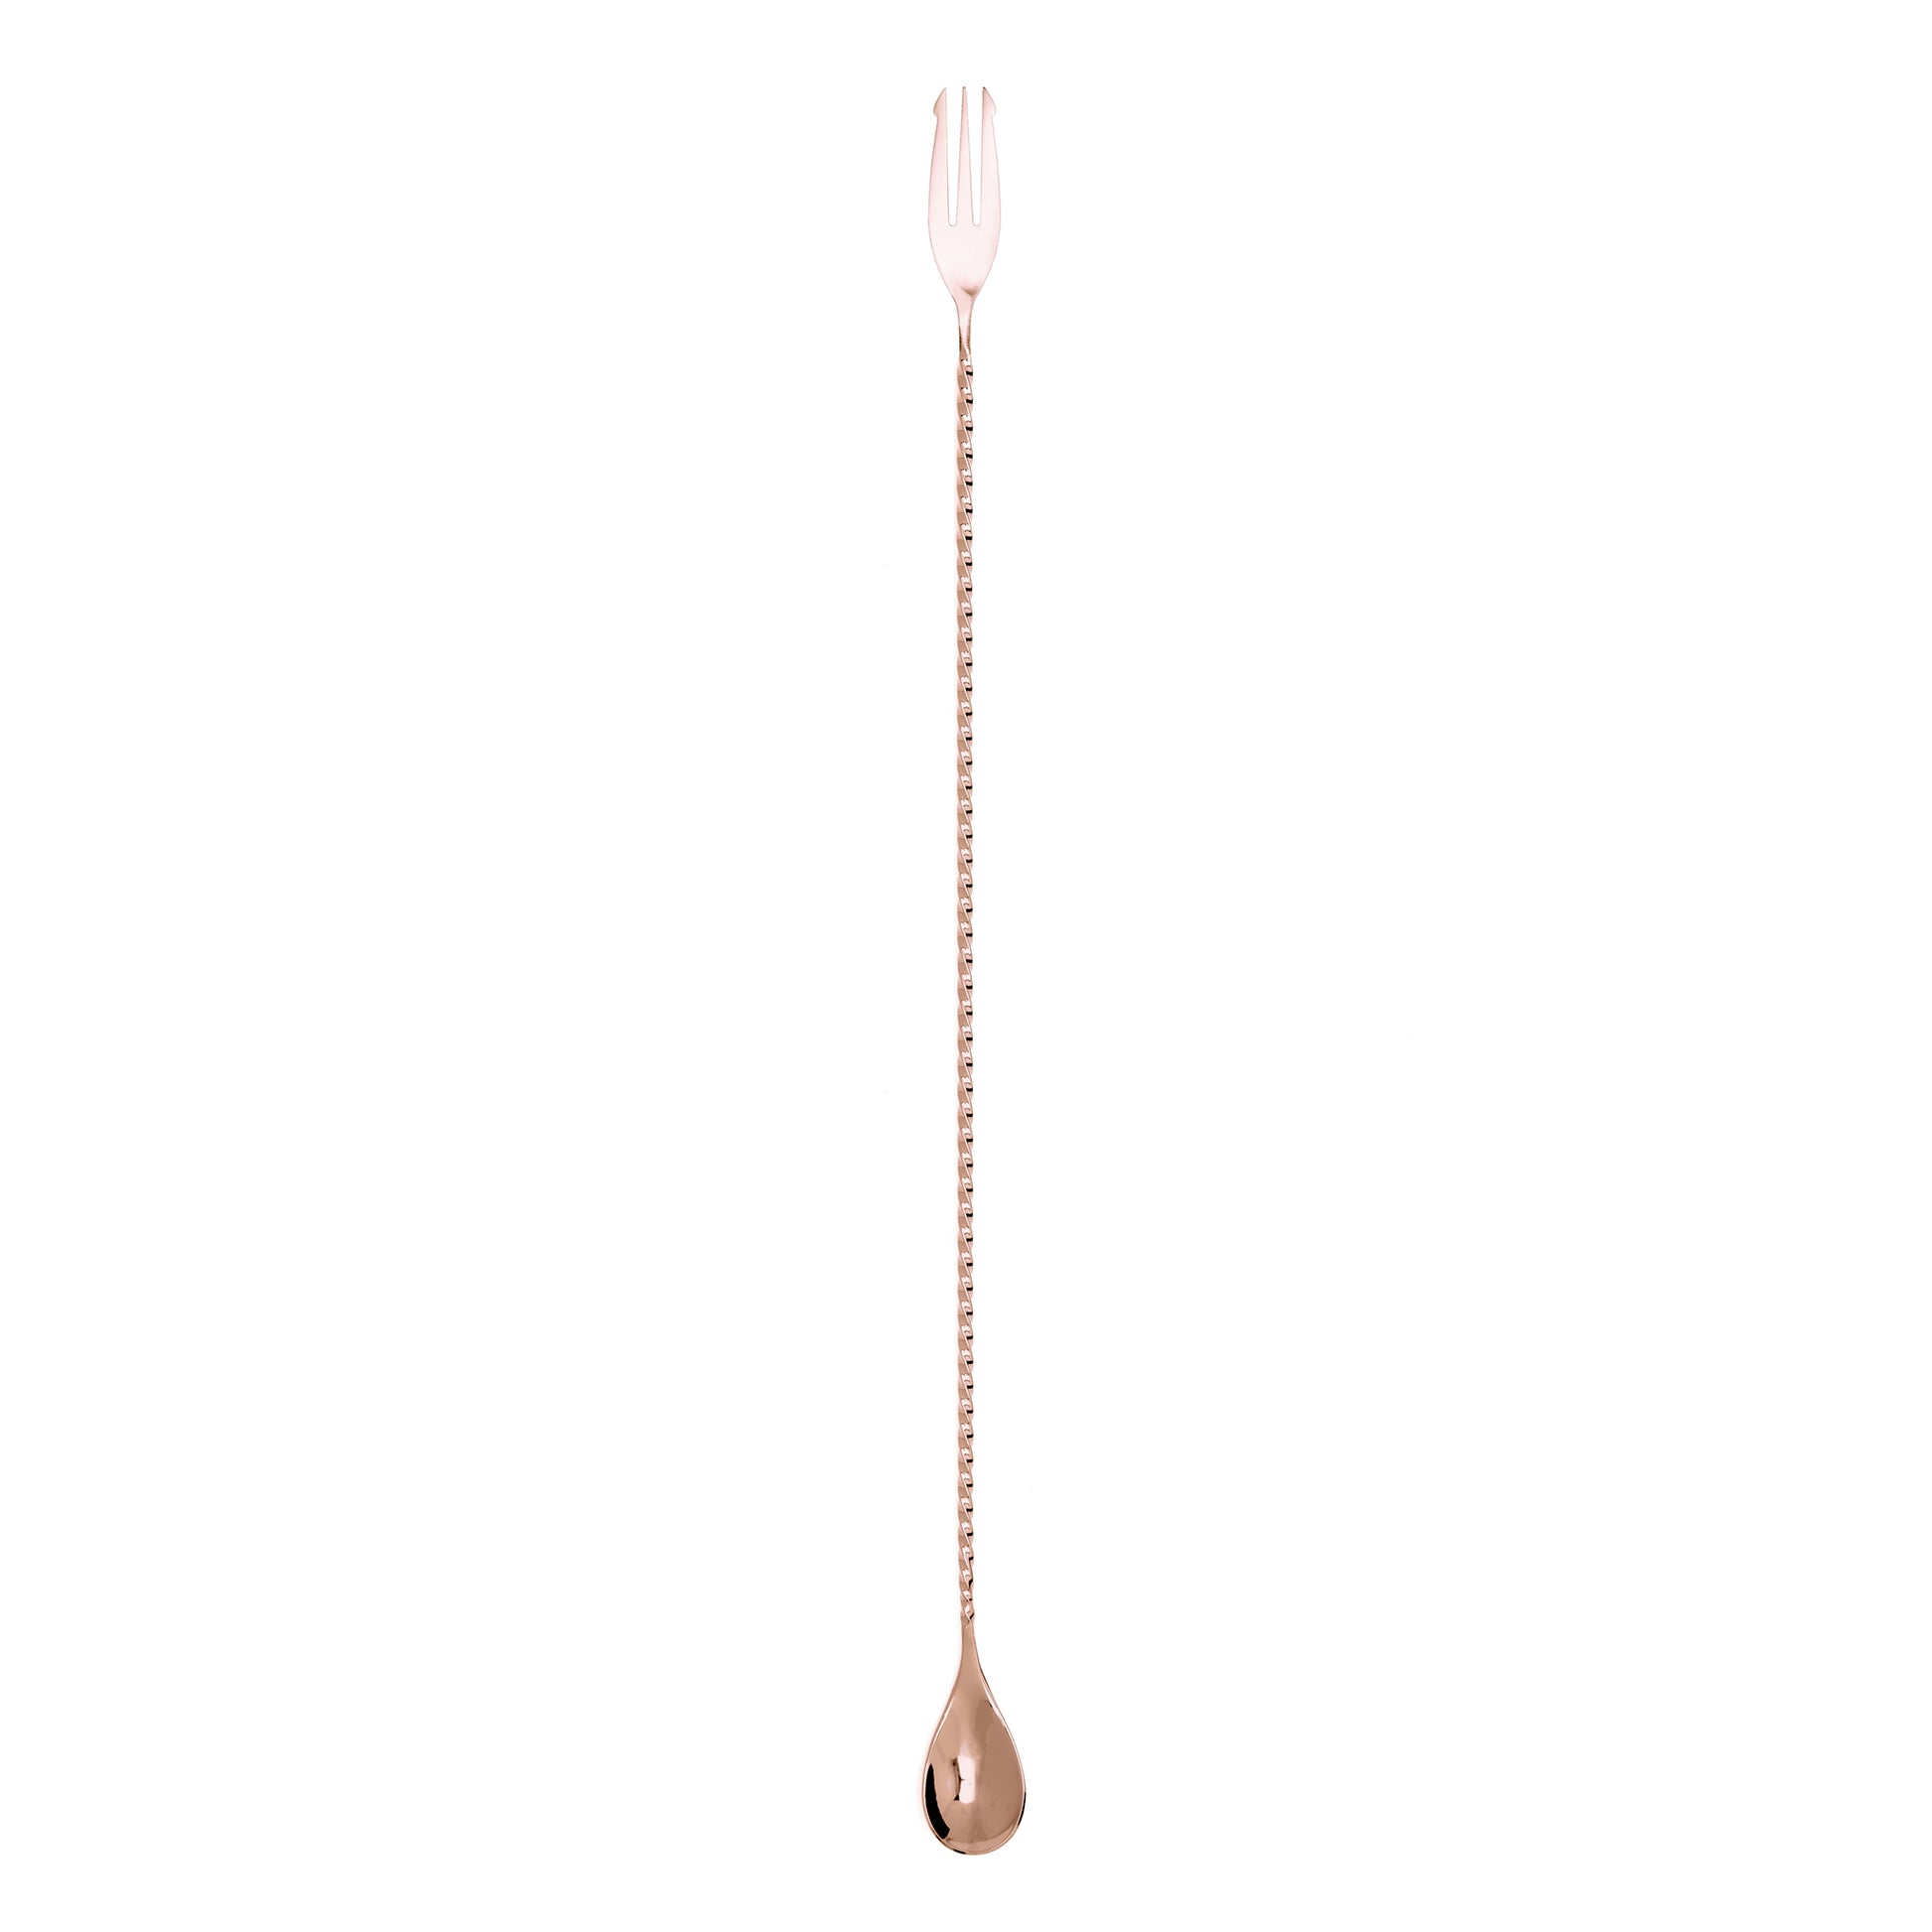 TRIDENT BARSPOON / COPPER-PLATED / 50cm